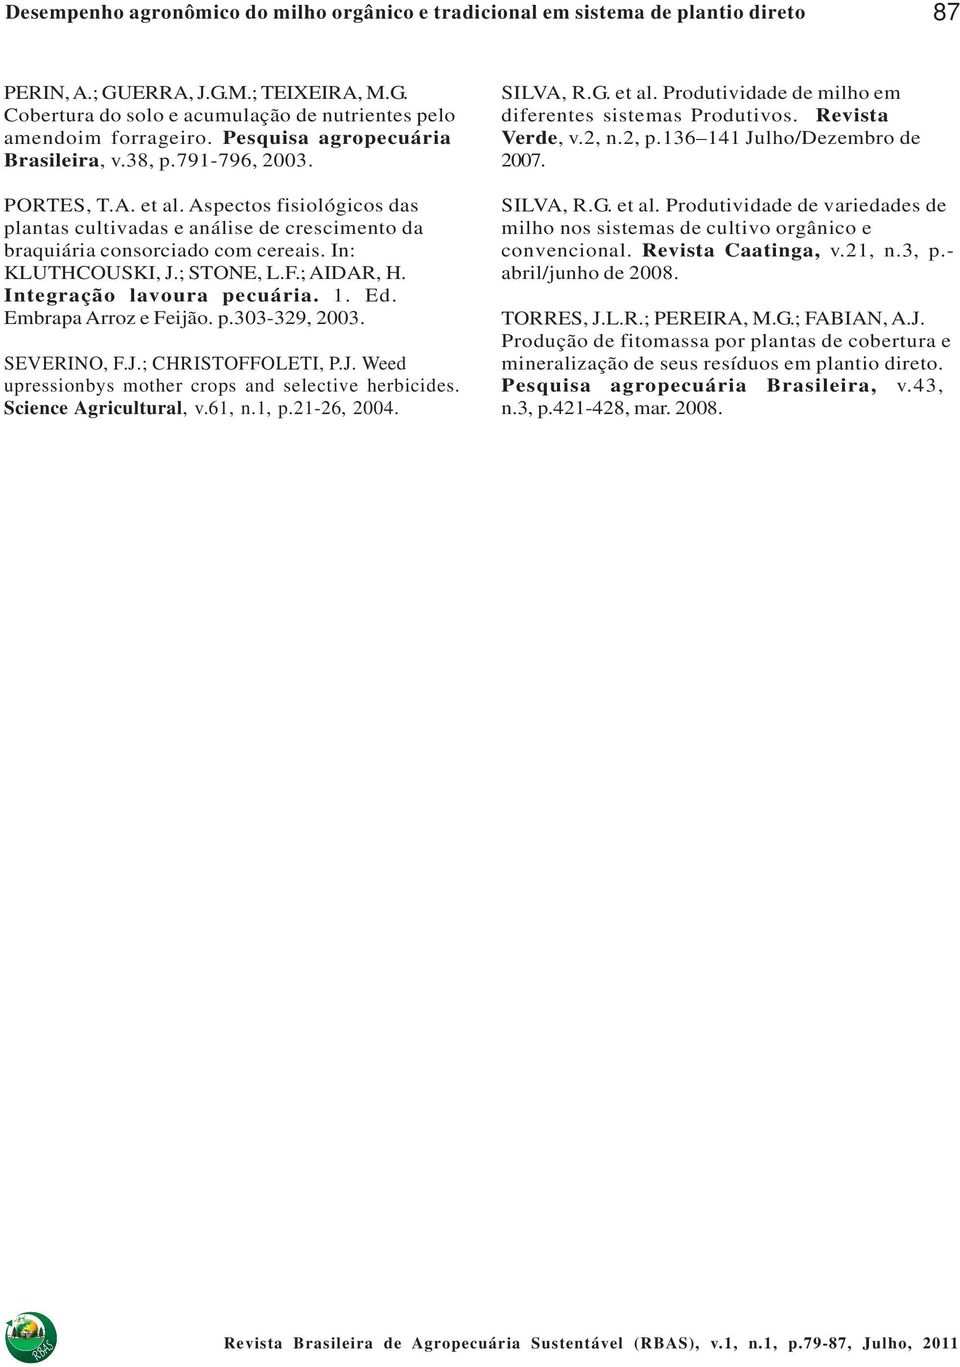 Embrapa Arroz e Feijão. p.303-329, 2003. SEVERINO, F.J.; CHRISTOFFOLETI, P.J. Weed upressionbys mother crops and selective herbicides. Science Agricultural, v.61, n.1, p.21-26, 2004. SILVA, R.G.